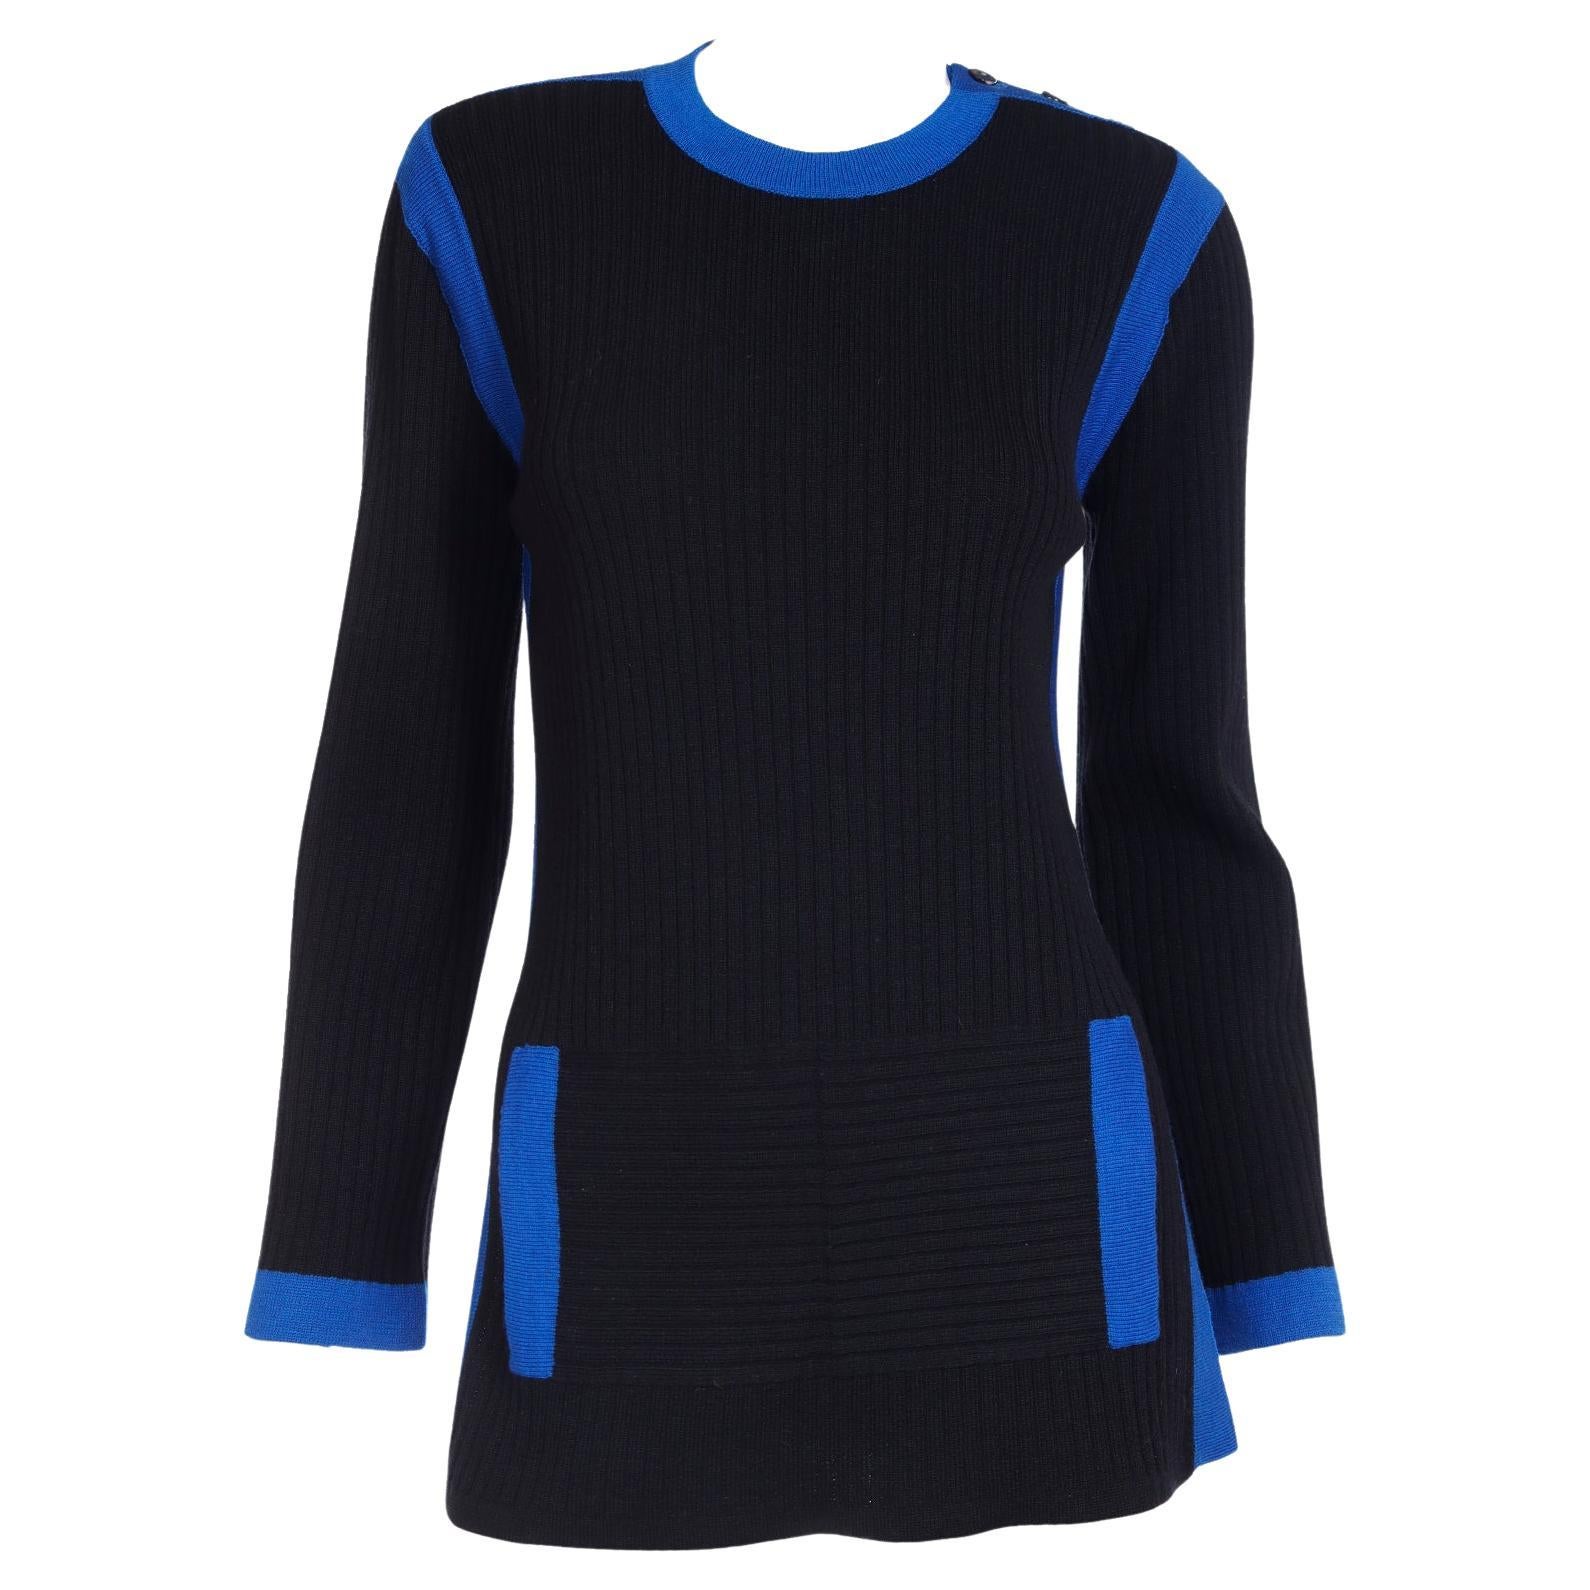 Yves Saint Laurent Vintage Black and Blue Knit Pullover Sweater